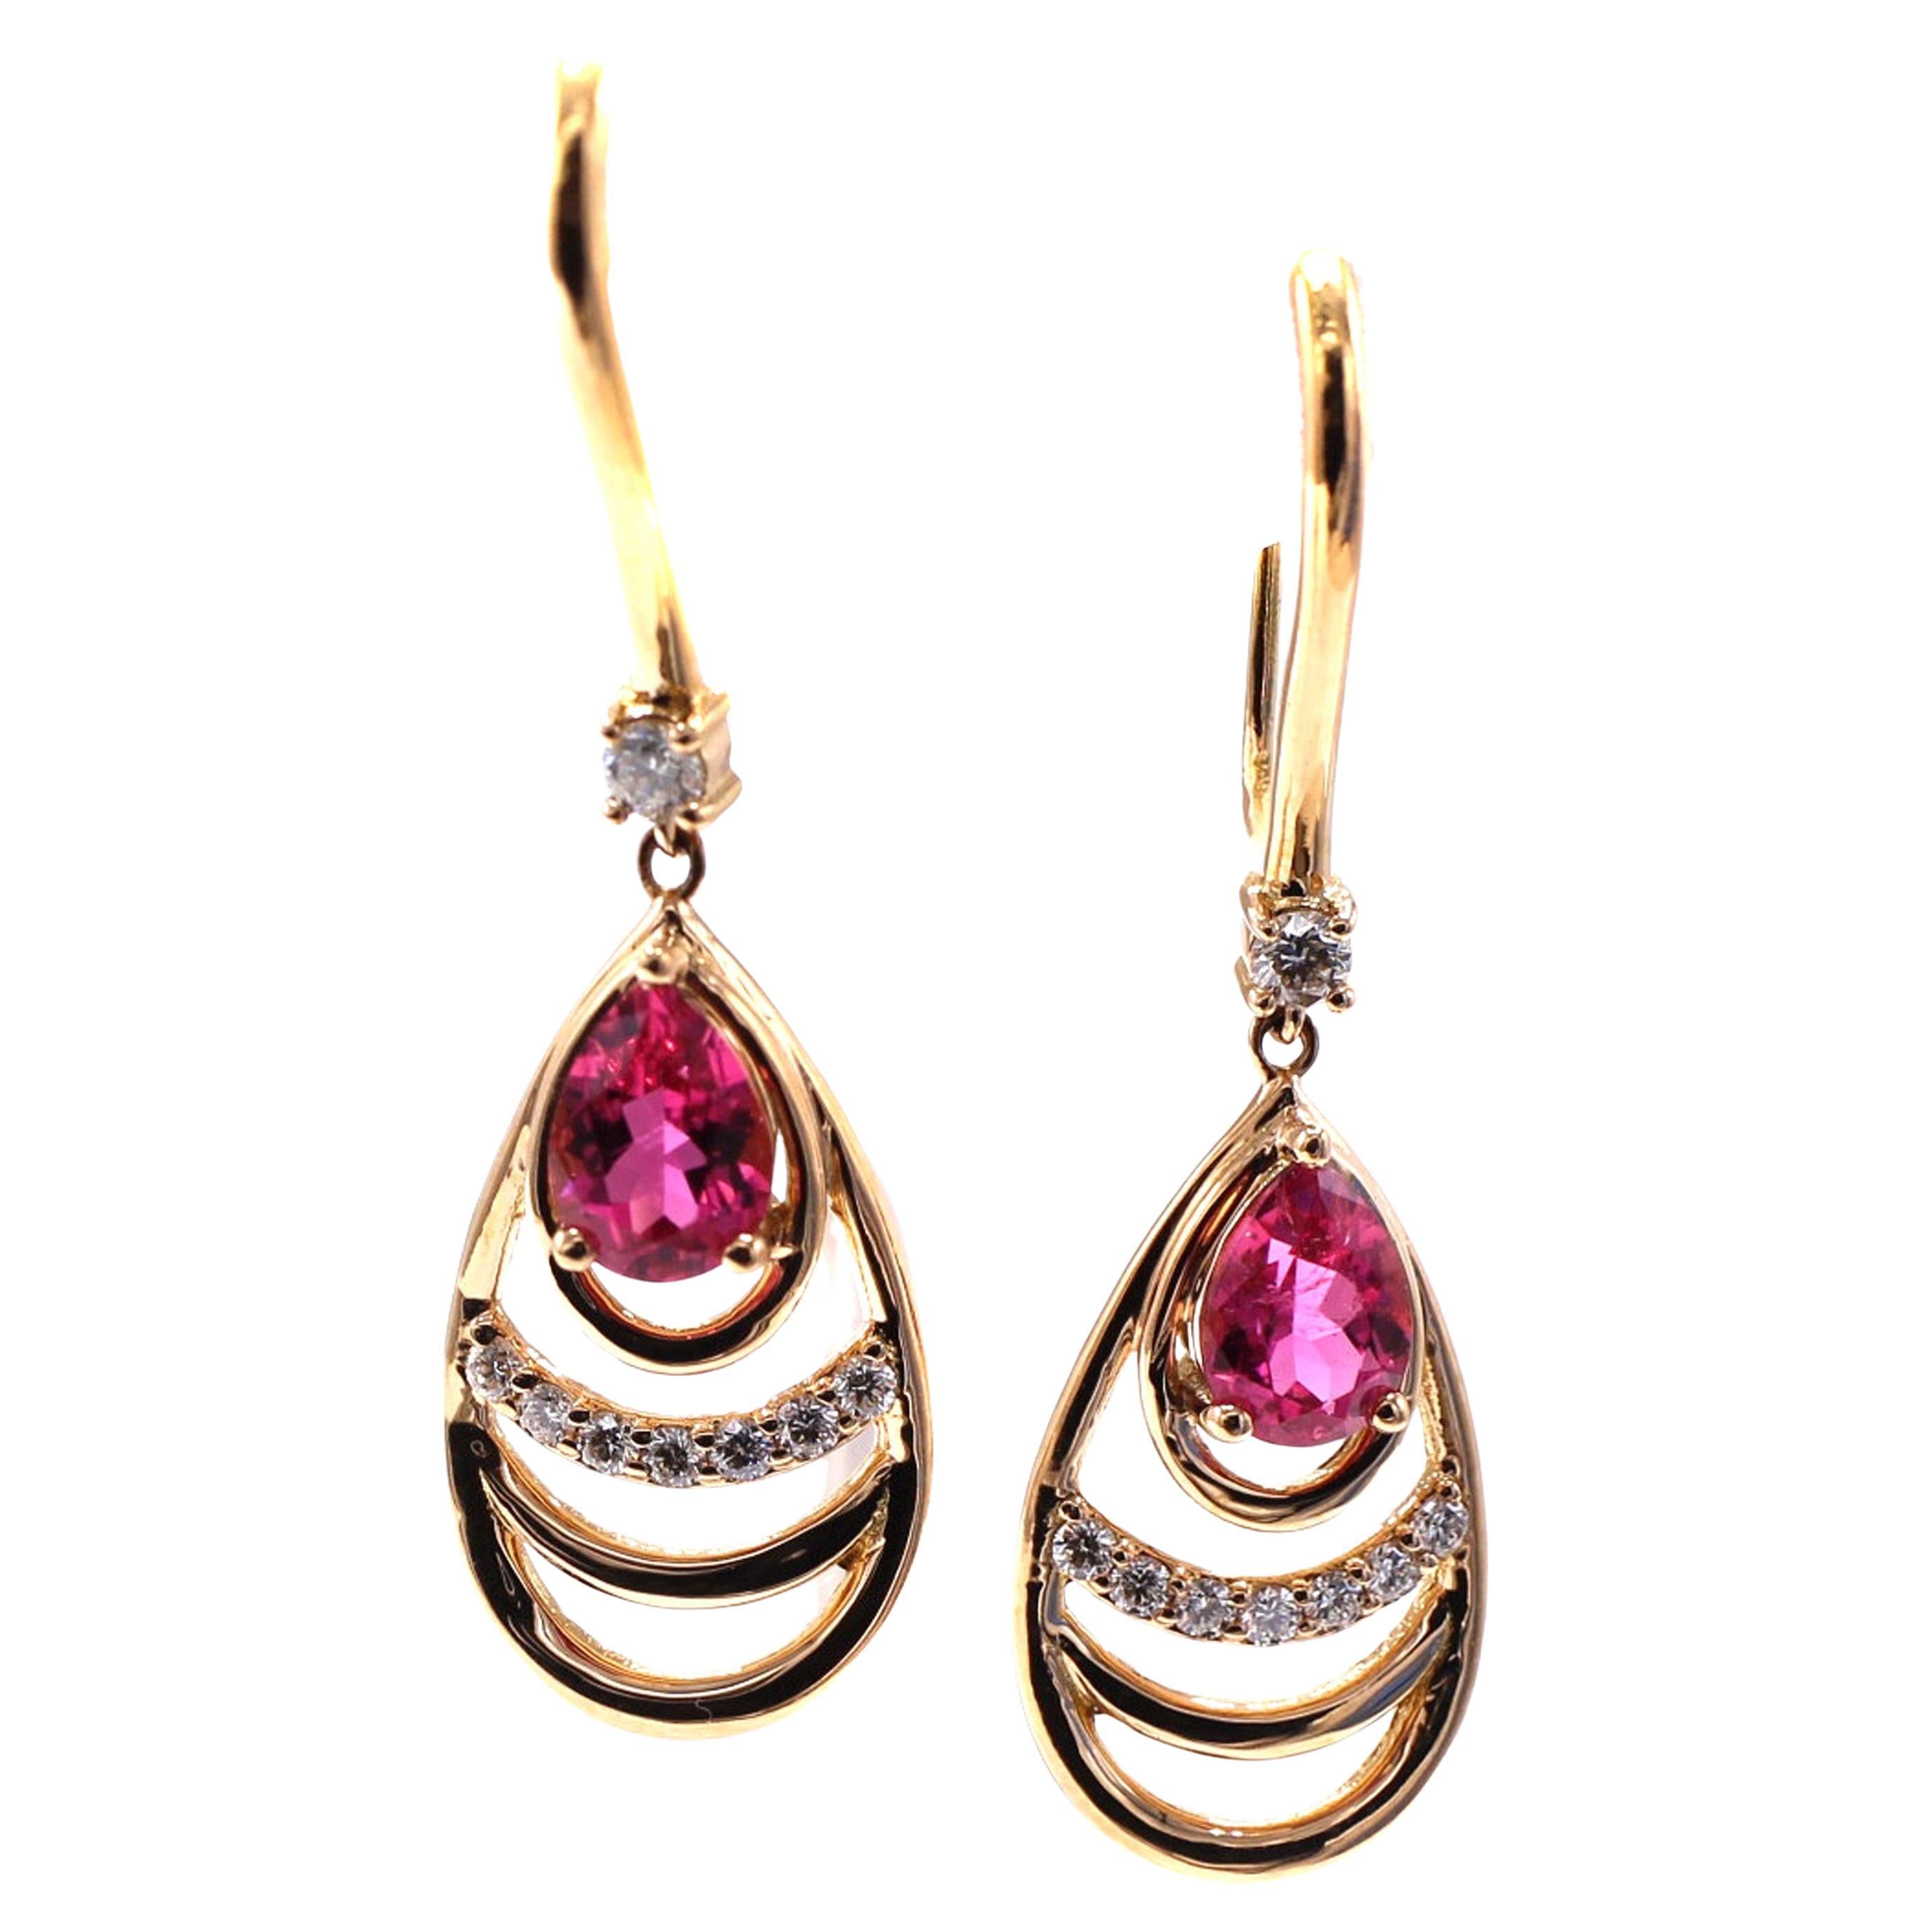 These beautifully designed and masterfully handcrafted earrings are both a chic and contemporary every-day wear. 2 perfectly matched bright and lively pinkish-red rubellites are set at the top of the teardrop mounting and a band of bright white and